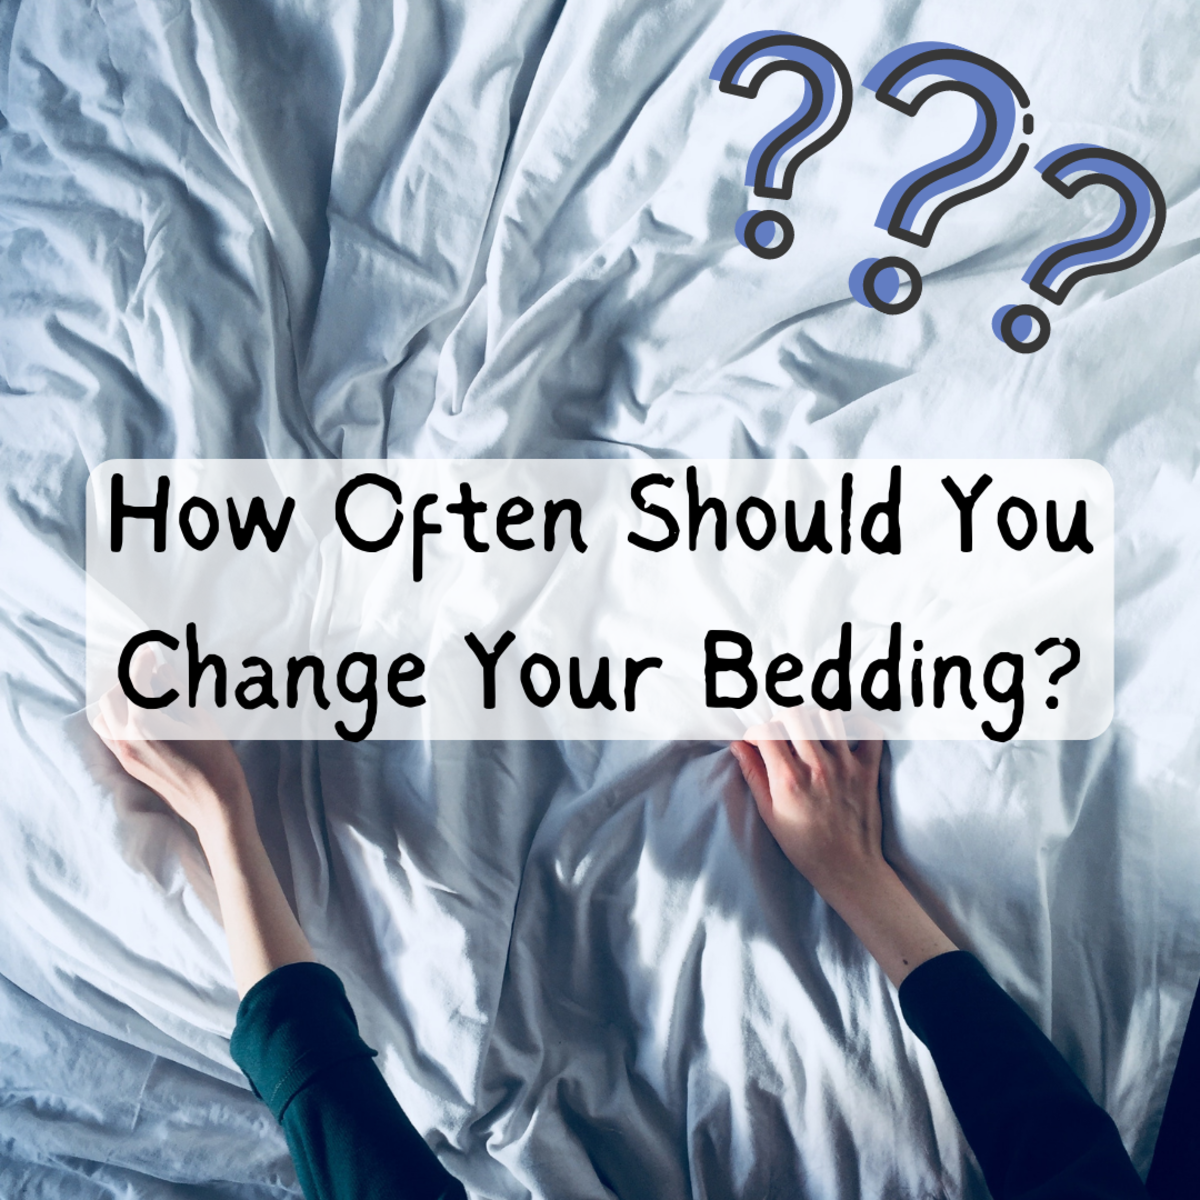 Read on to learn how often you should change your bedsheets, and what the downsides are of waiting too long to do so.